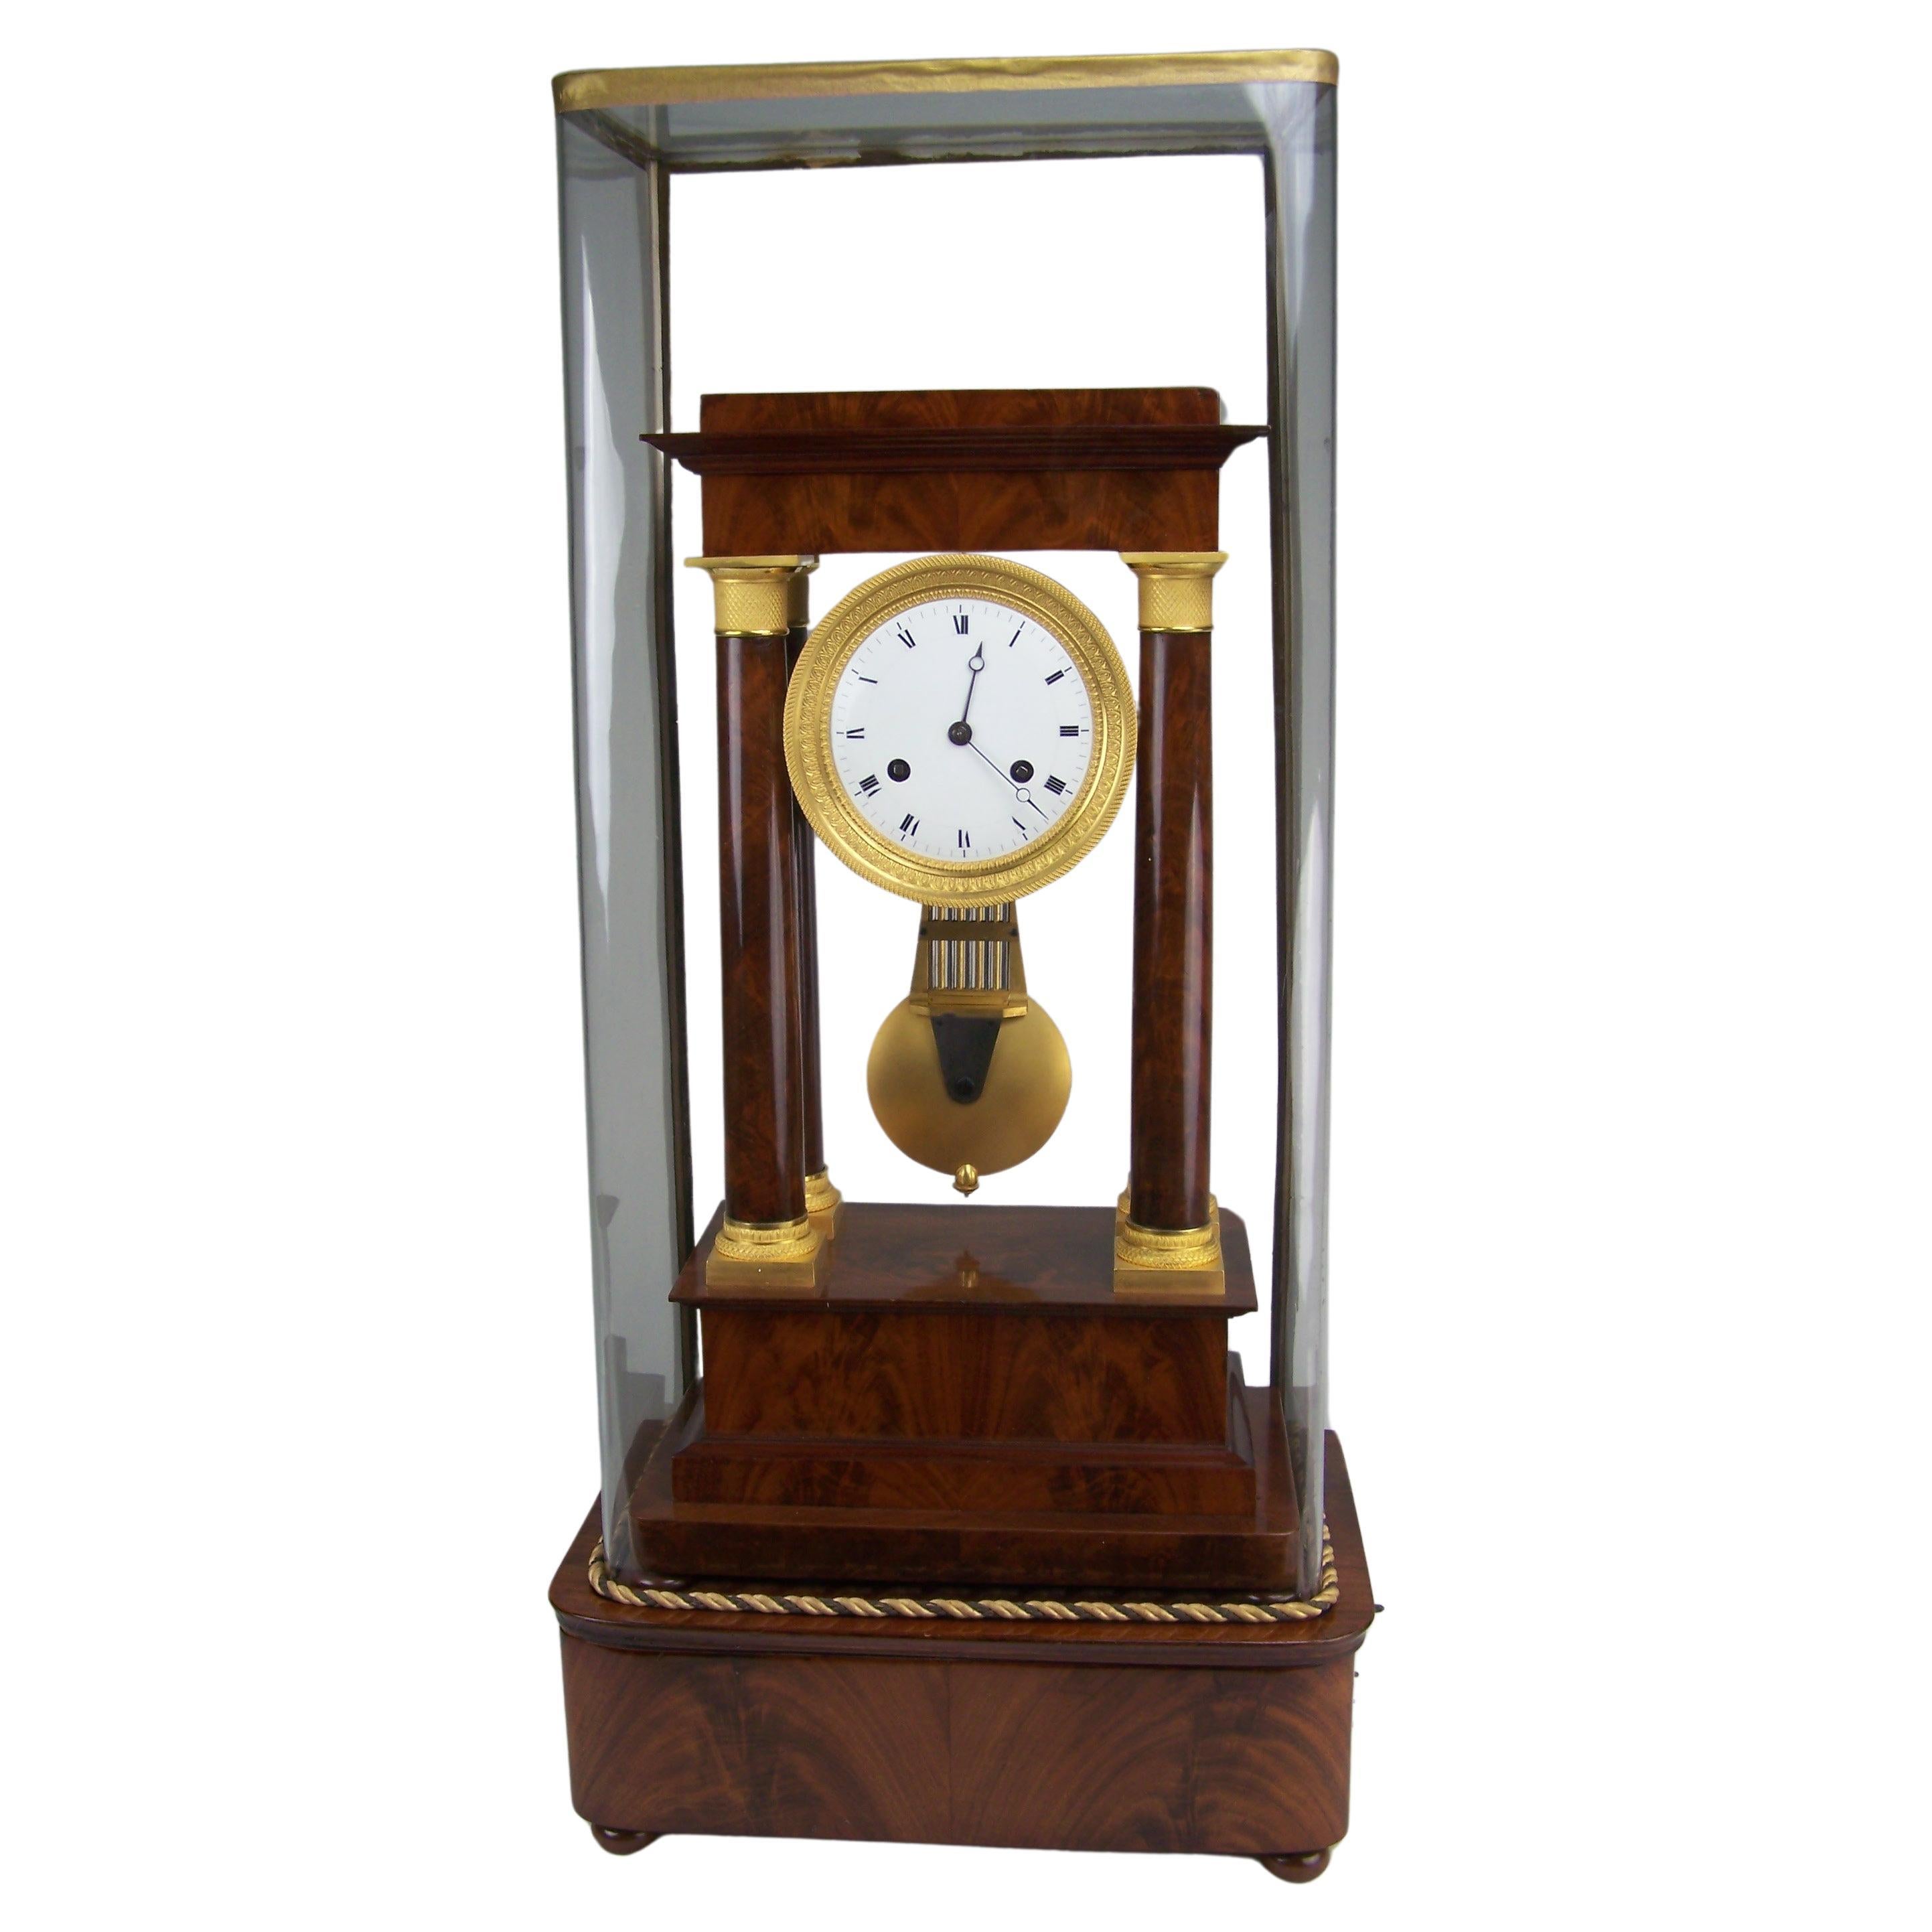 Musical Clock with pin wheel ecapement and fusee wound musical mechanism For Sale